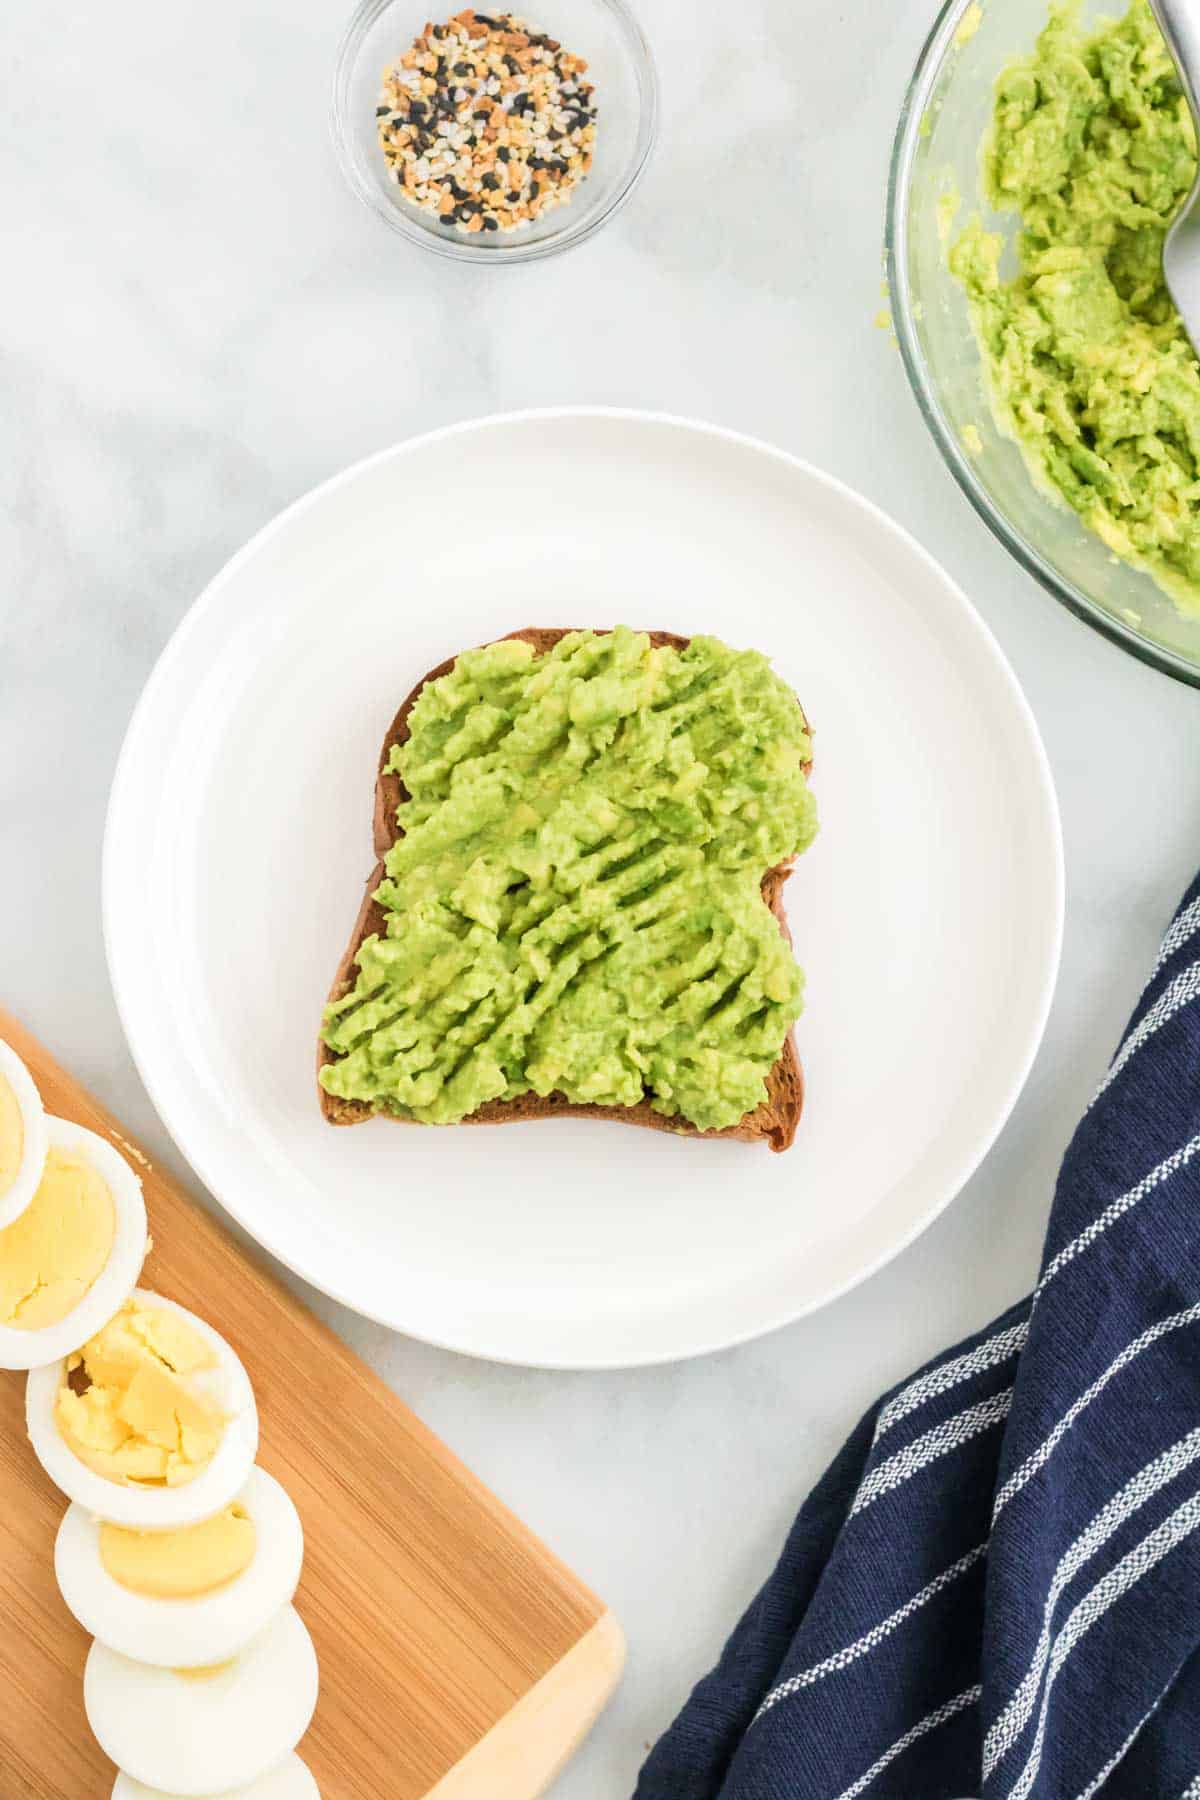 A slice of gluten-free bread topped with mashed avocado on a plate, next to a cutting board with sliced hard boiled eggs.